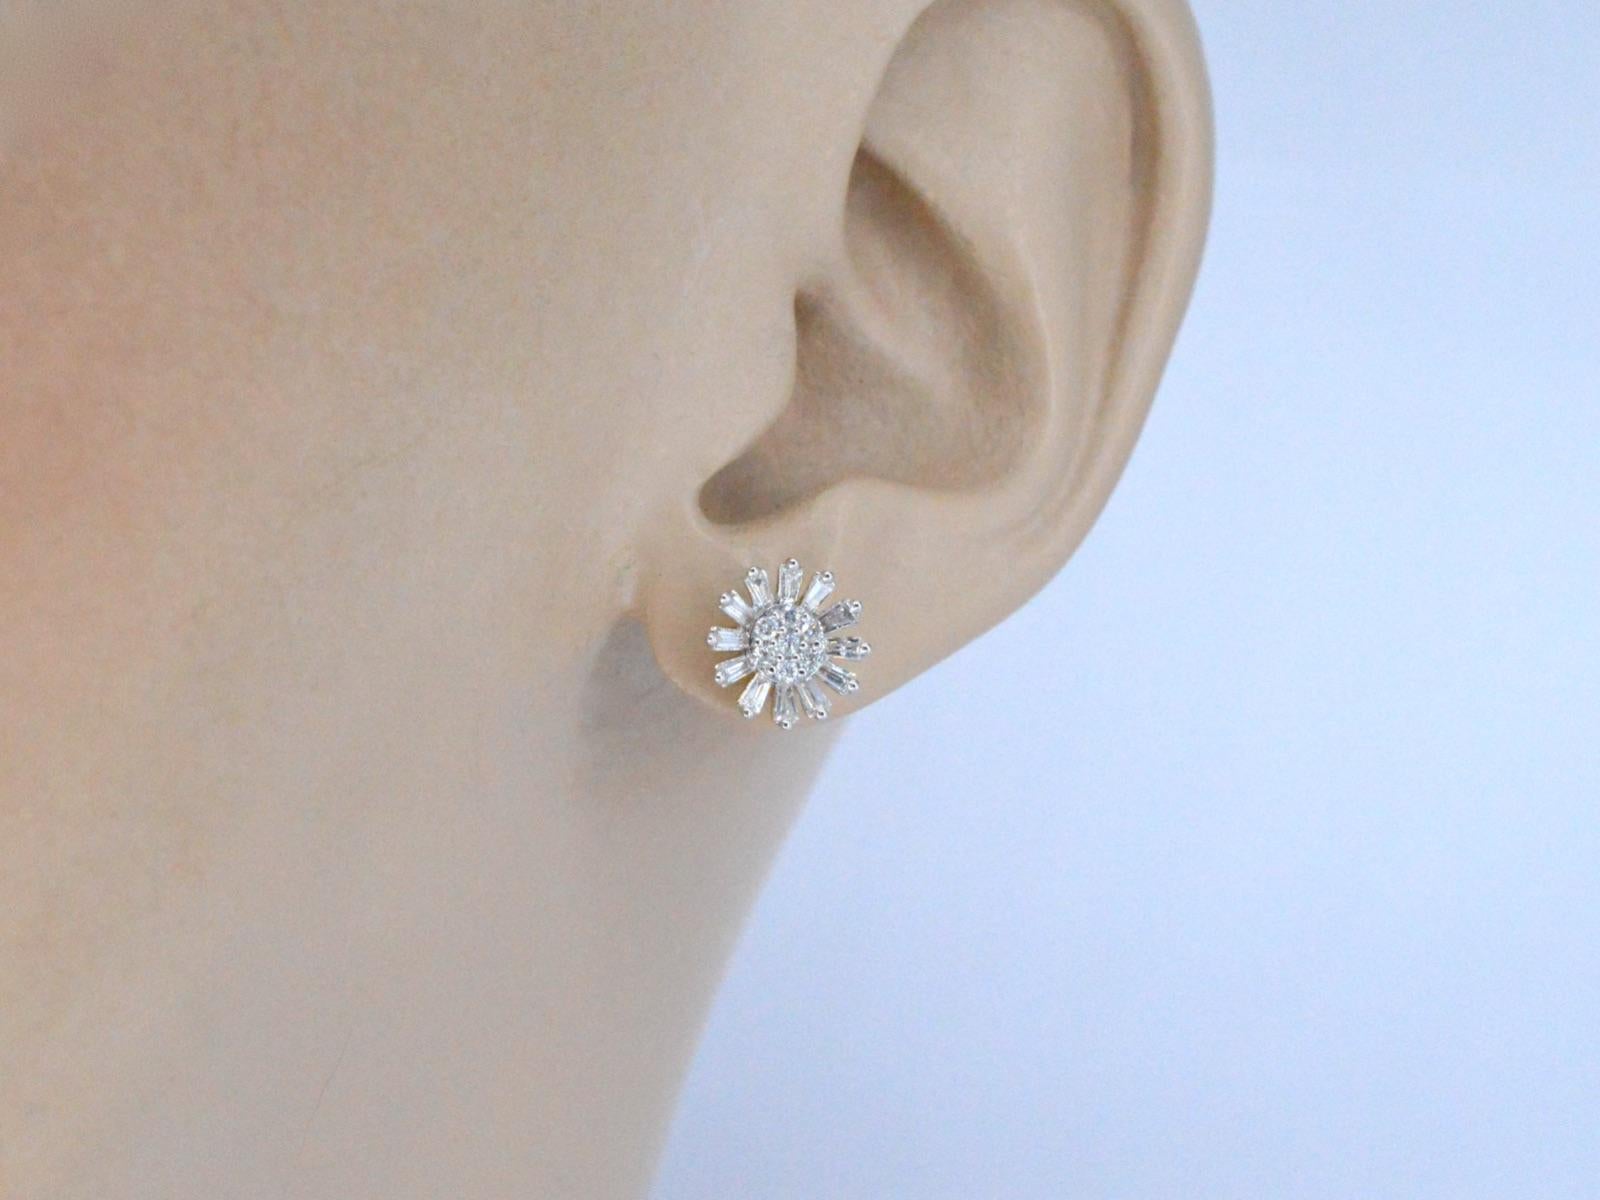 These 14K gold earrings are a beautiful and delicate piece of jewelry designed in the shape of a flower. The gold is a high-quality metal that is known for its durability and lustrous properties. The earrings feature intricate details, the petals